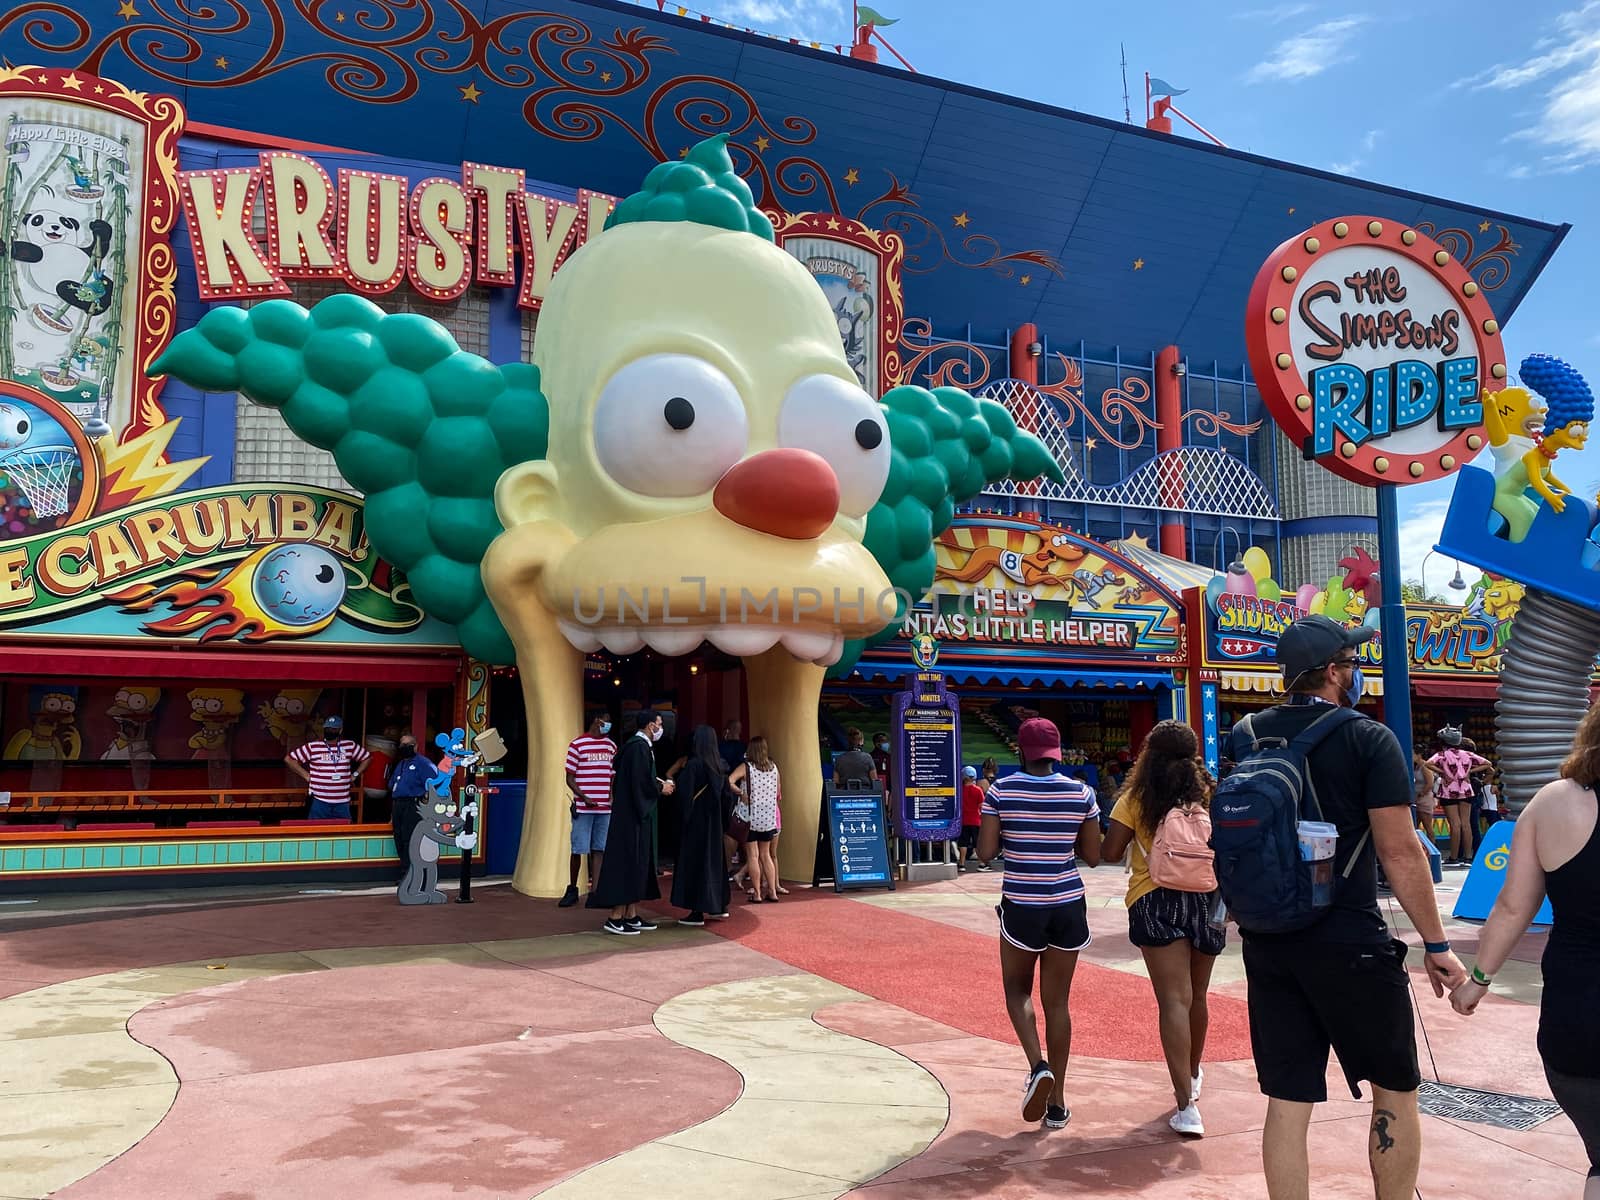 The entrance to The Simpsons Ride at Universal Studios by Jshanebutt